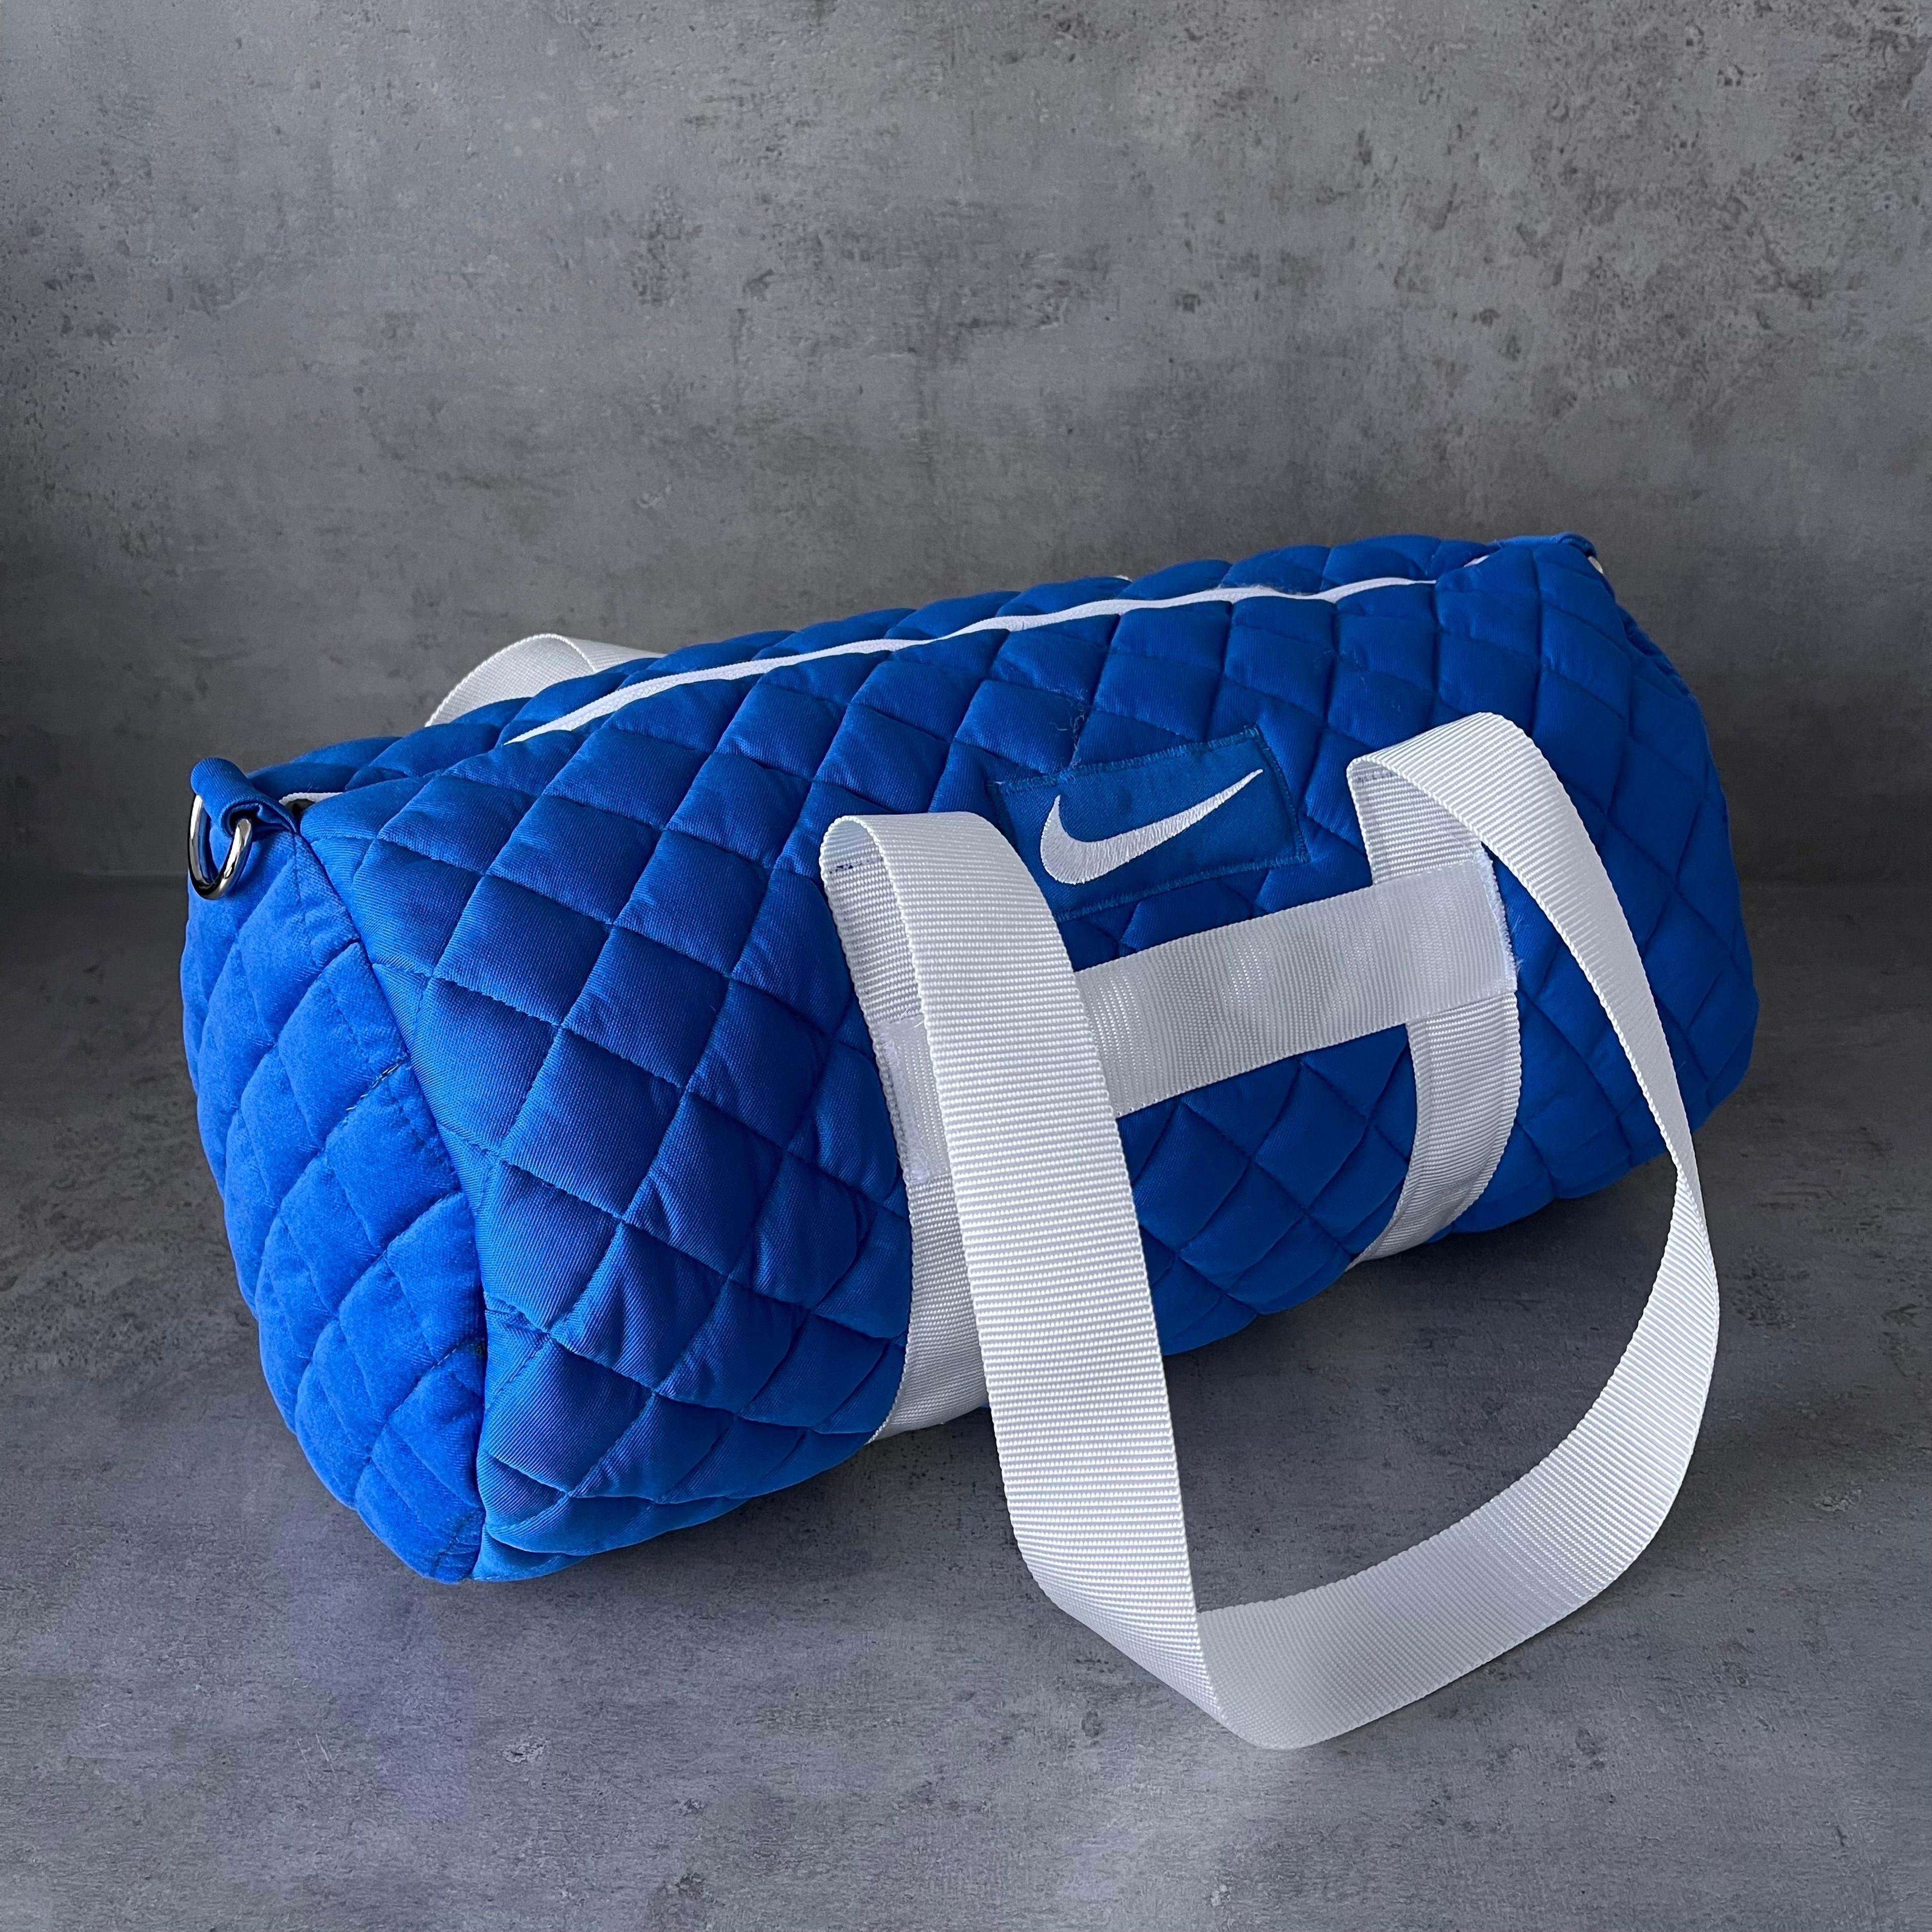 Alternate View 1 of Quilted Duffle Bag Blue